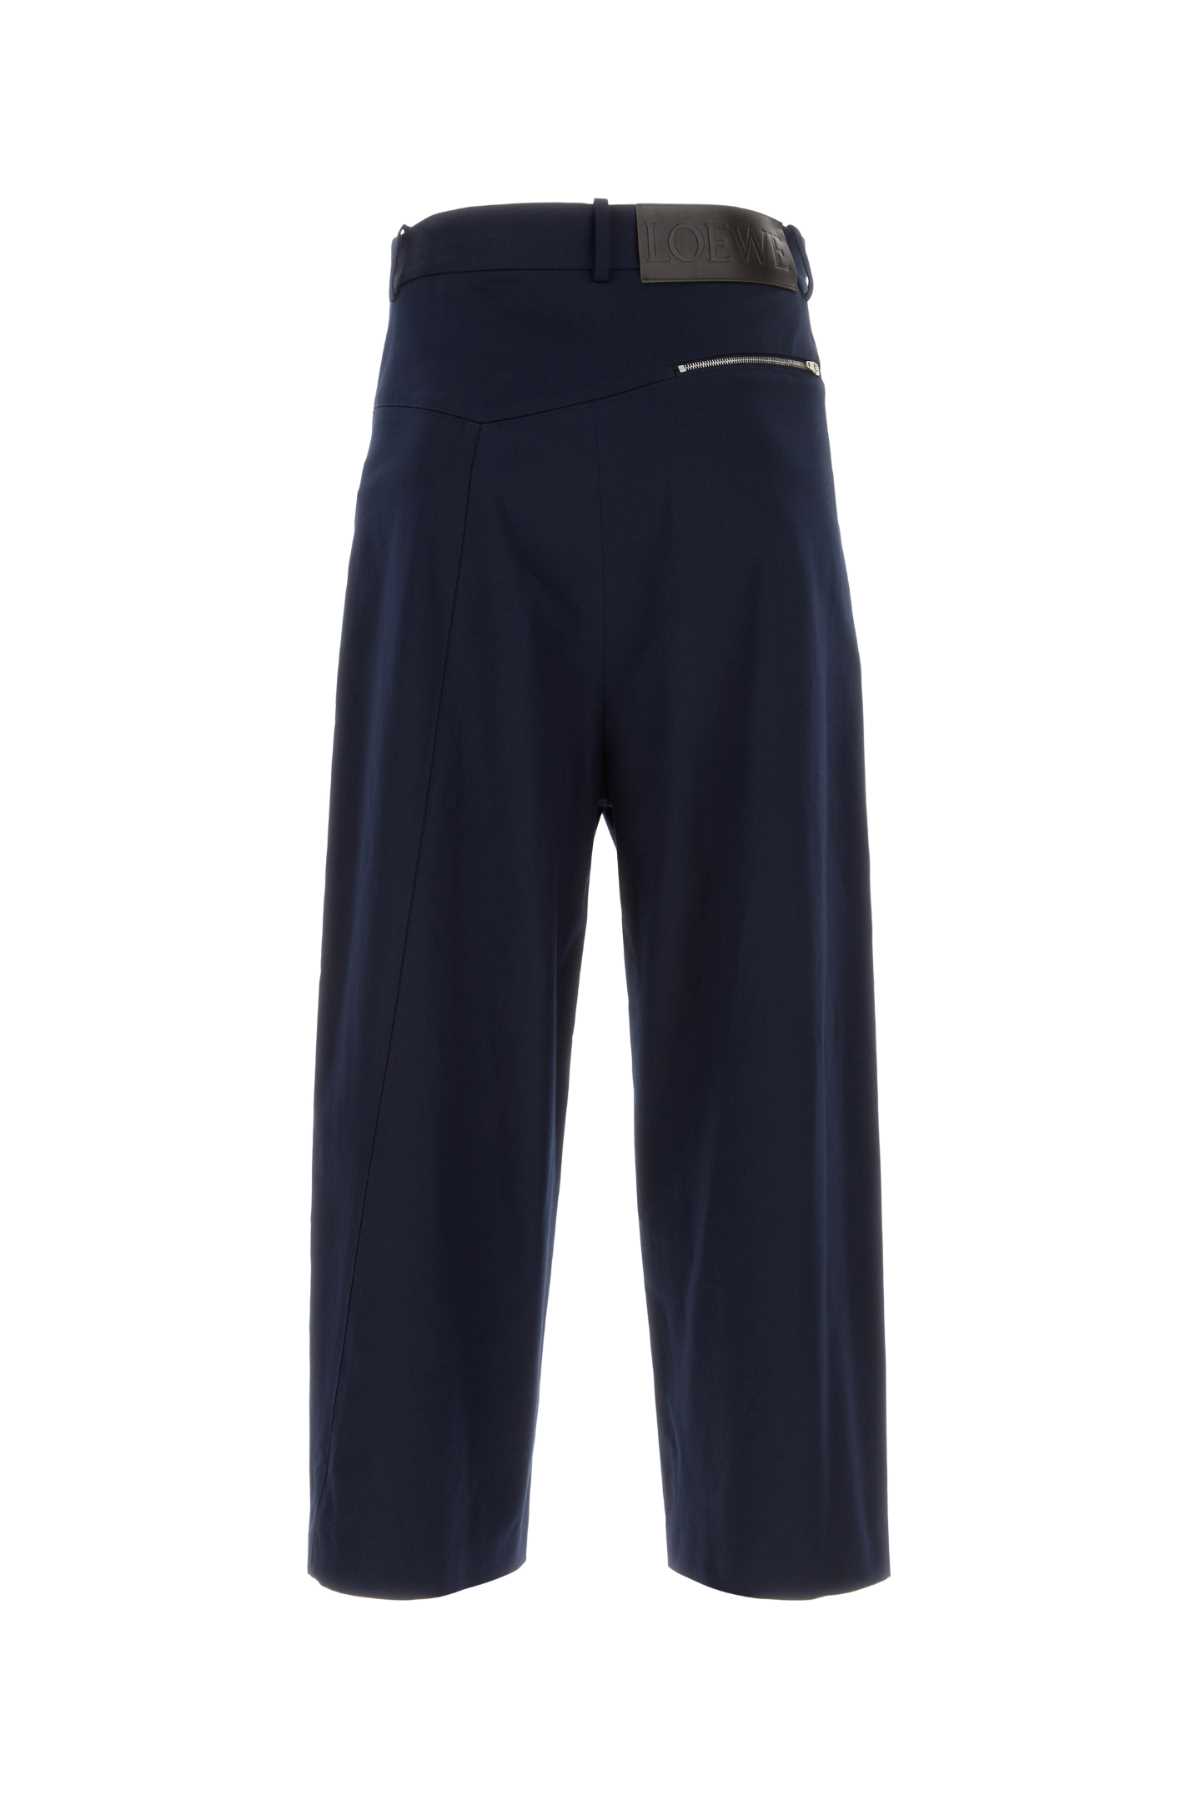 Loewe Navy Blue Stretch Cotton Cigarette Pant In Midnightblue